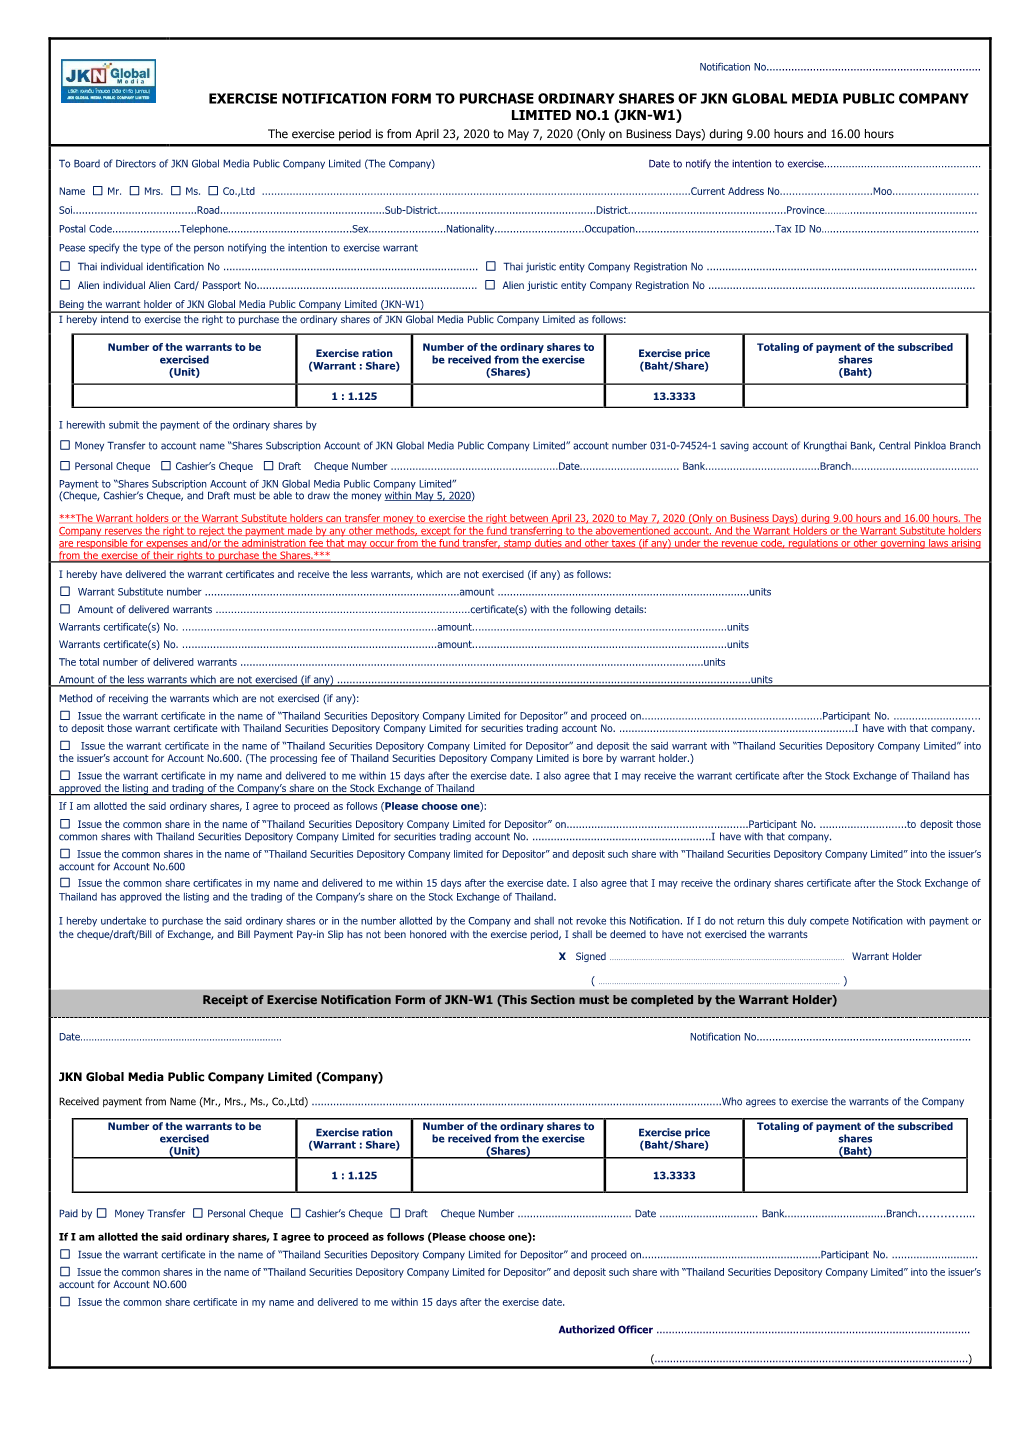 EXERCISE NOTIFICATION FORM to PURCHASE ORDINARY SHARES of JKN GLOBAL MEDIA PUBLIC COMPANY LIMITED NO.1 (JKN-W1) X Signed